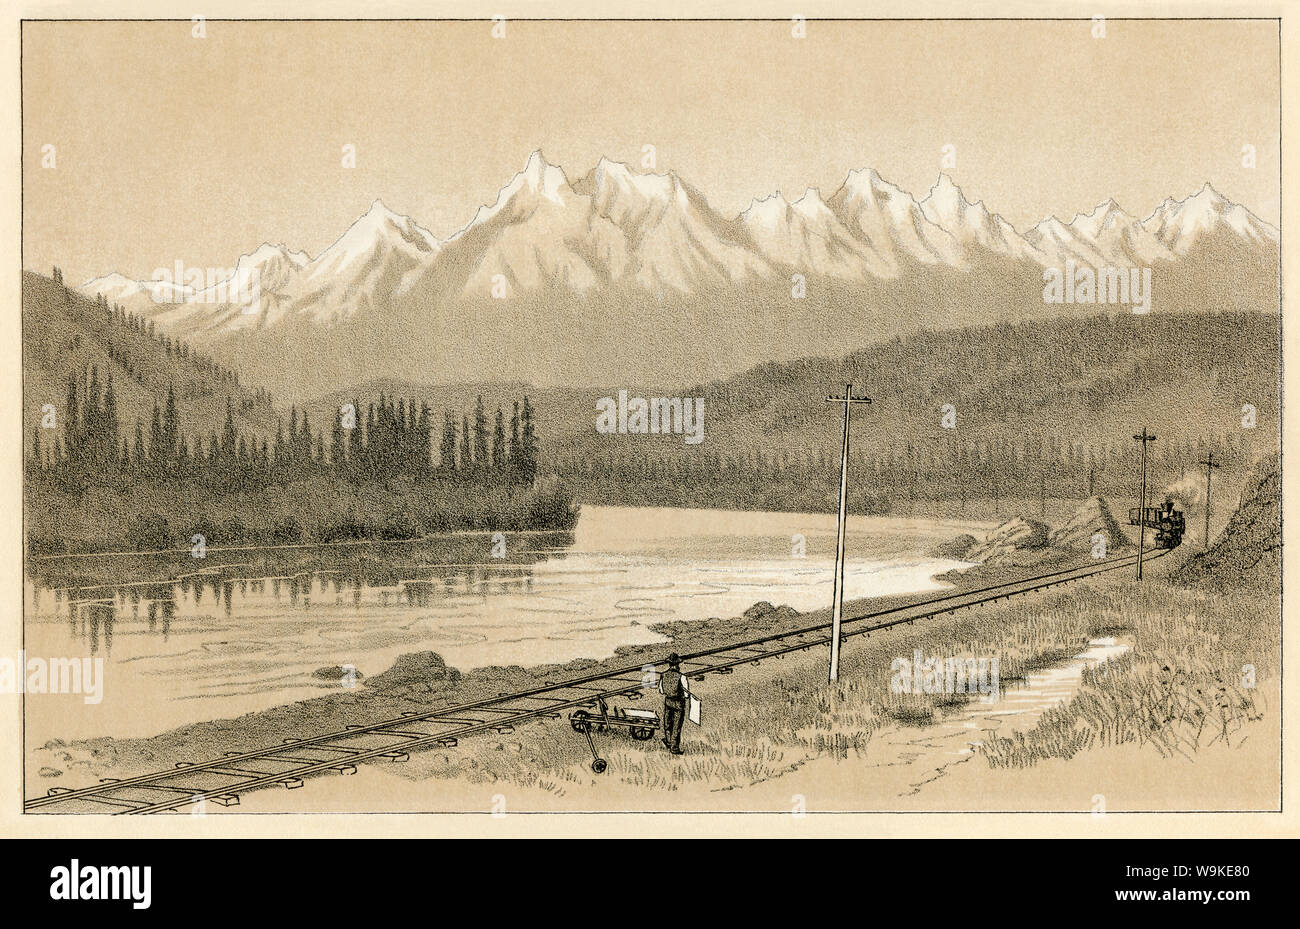 Northern Pacific railroad along Clark's Fork near Perma, Montana, 1880s. Lithograph Stock Photo